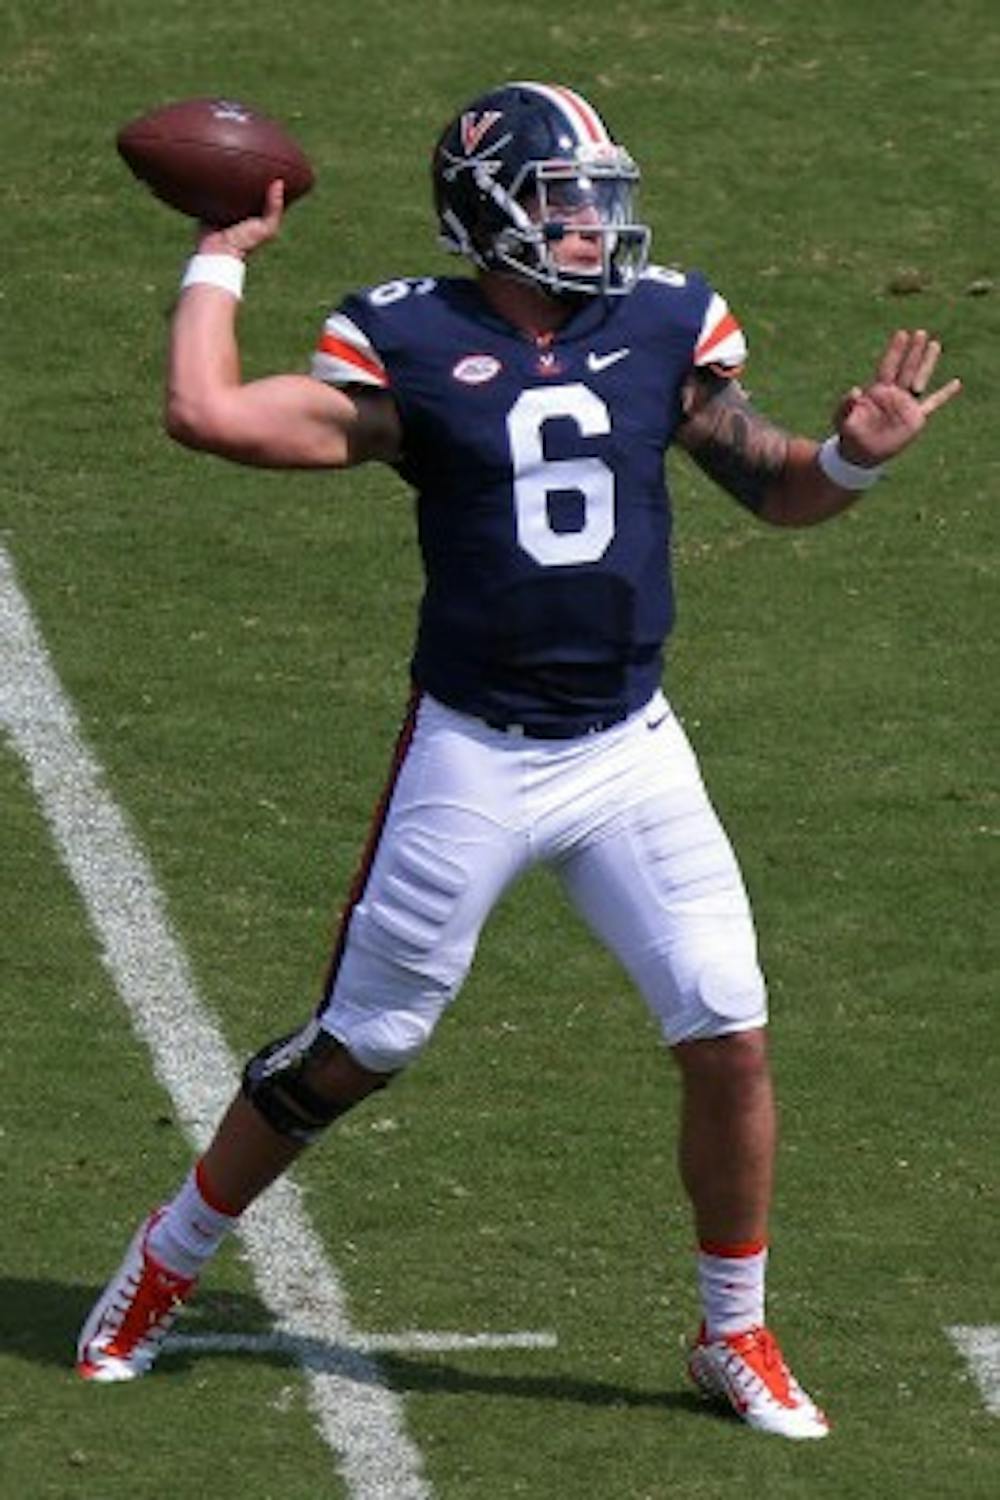 <p>Kurt Benkert, who broke the program record for passing yards against Central Michigan,&nbsp;tossed for&nbsp;336 yards and three touchdowns against Duke two weeks ago.</p>